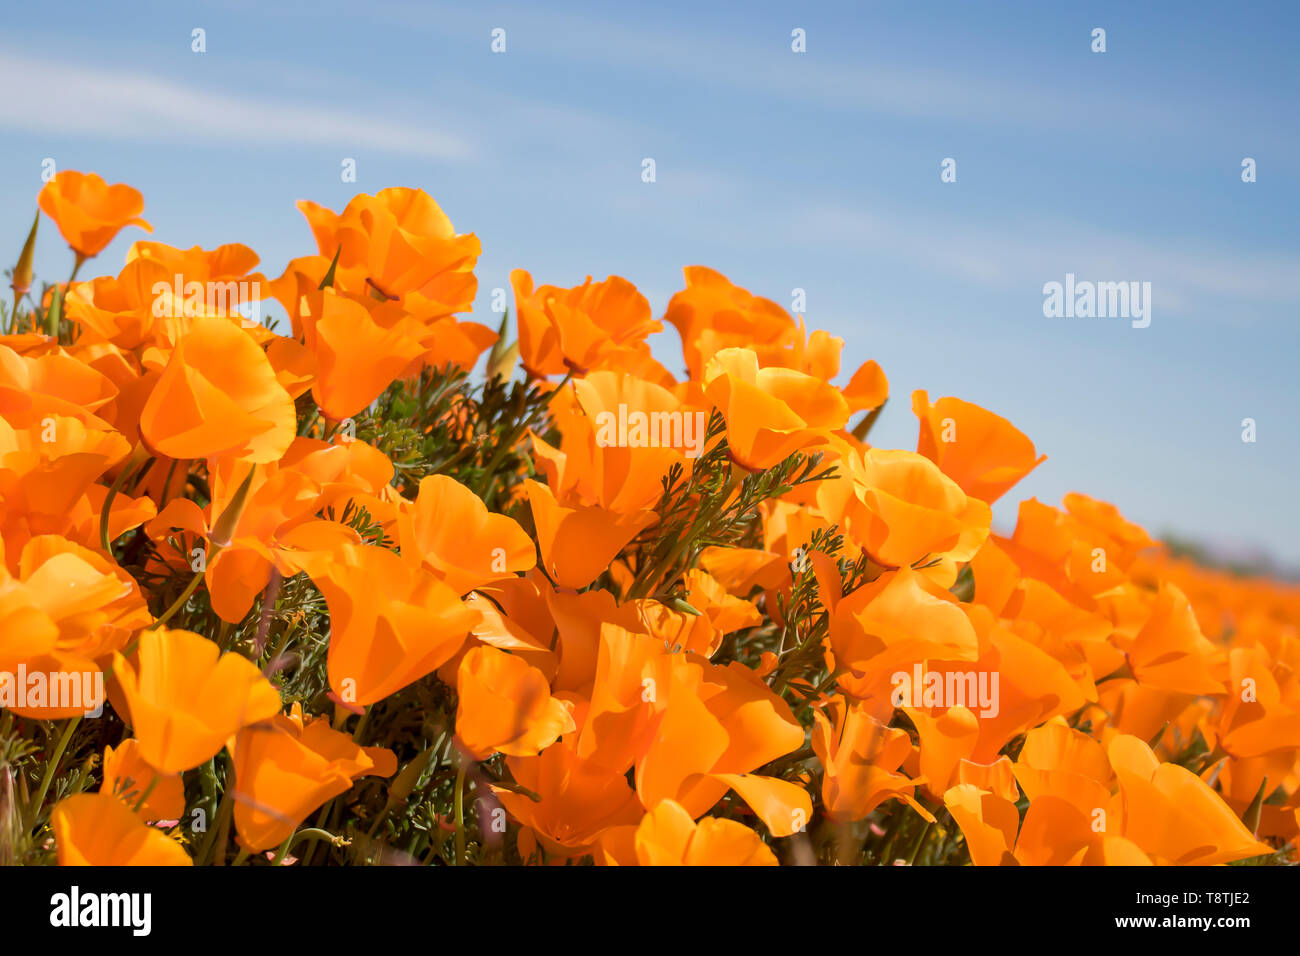 Vibrant orange California Poppy flowers blooming under blue sky in close up side angle view. Stock Photo